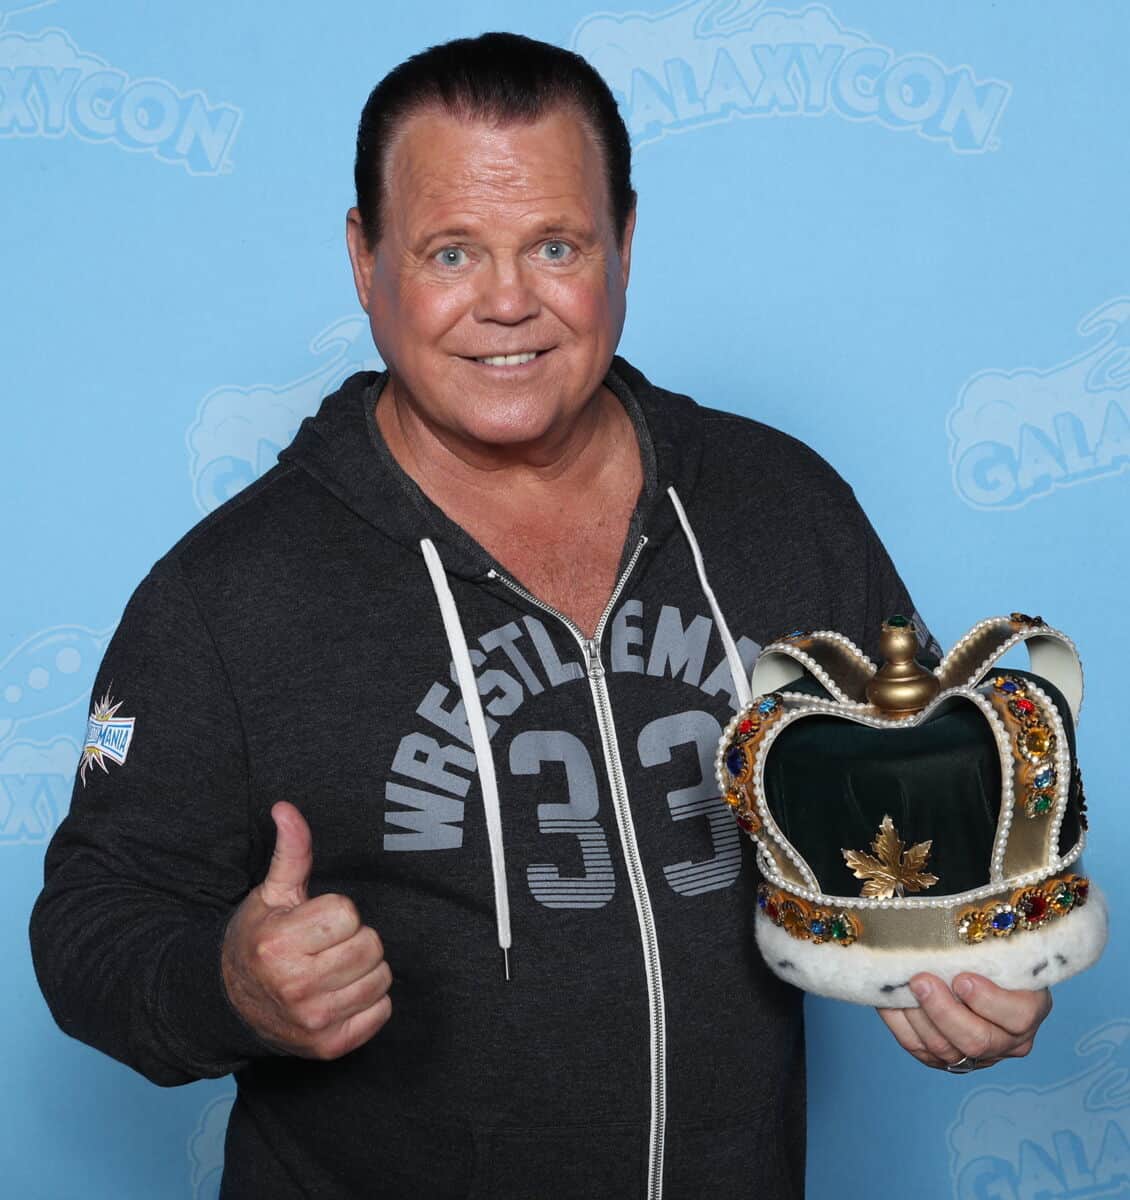 Jerry Lawler Net Worth Details, Personal Info